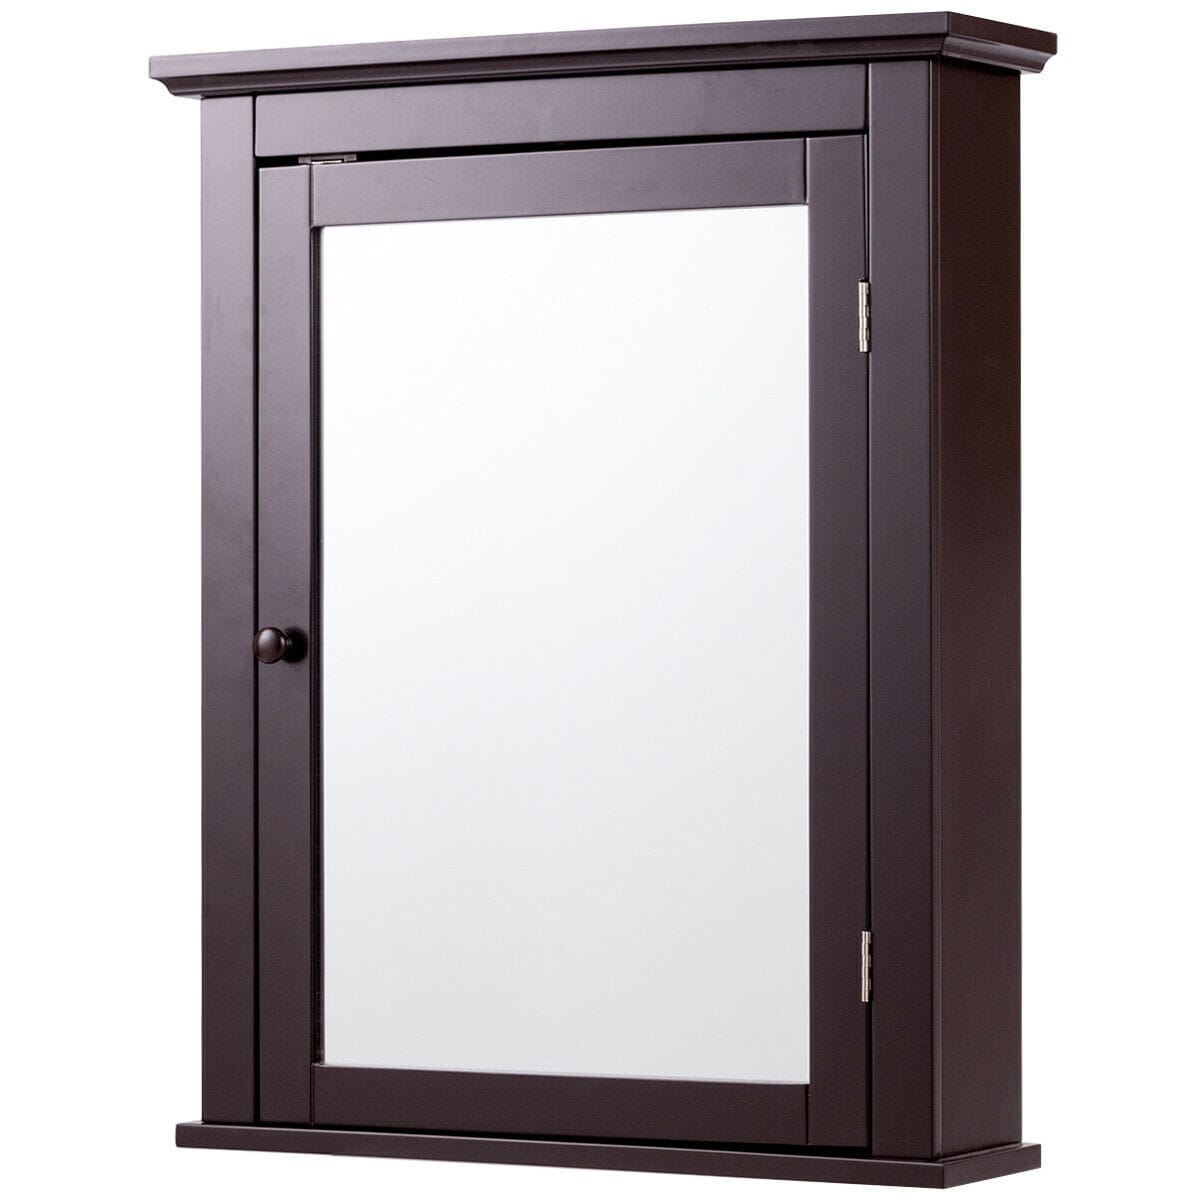 https://ak1.ostkcdn.com/images/products/is/images/direct/b2f579452269f11416ec23682bcd97d6f5ed4253/Gymax-Bathroom-Mirror-Cabinet-Wall-Mounted-Medicine-Storage-Adjustable.jpg